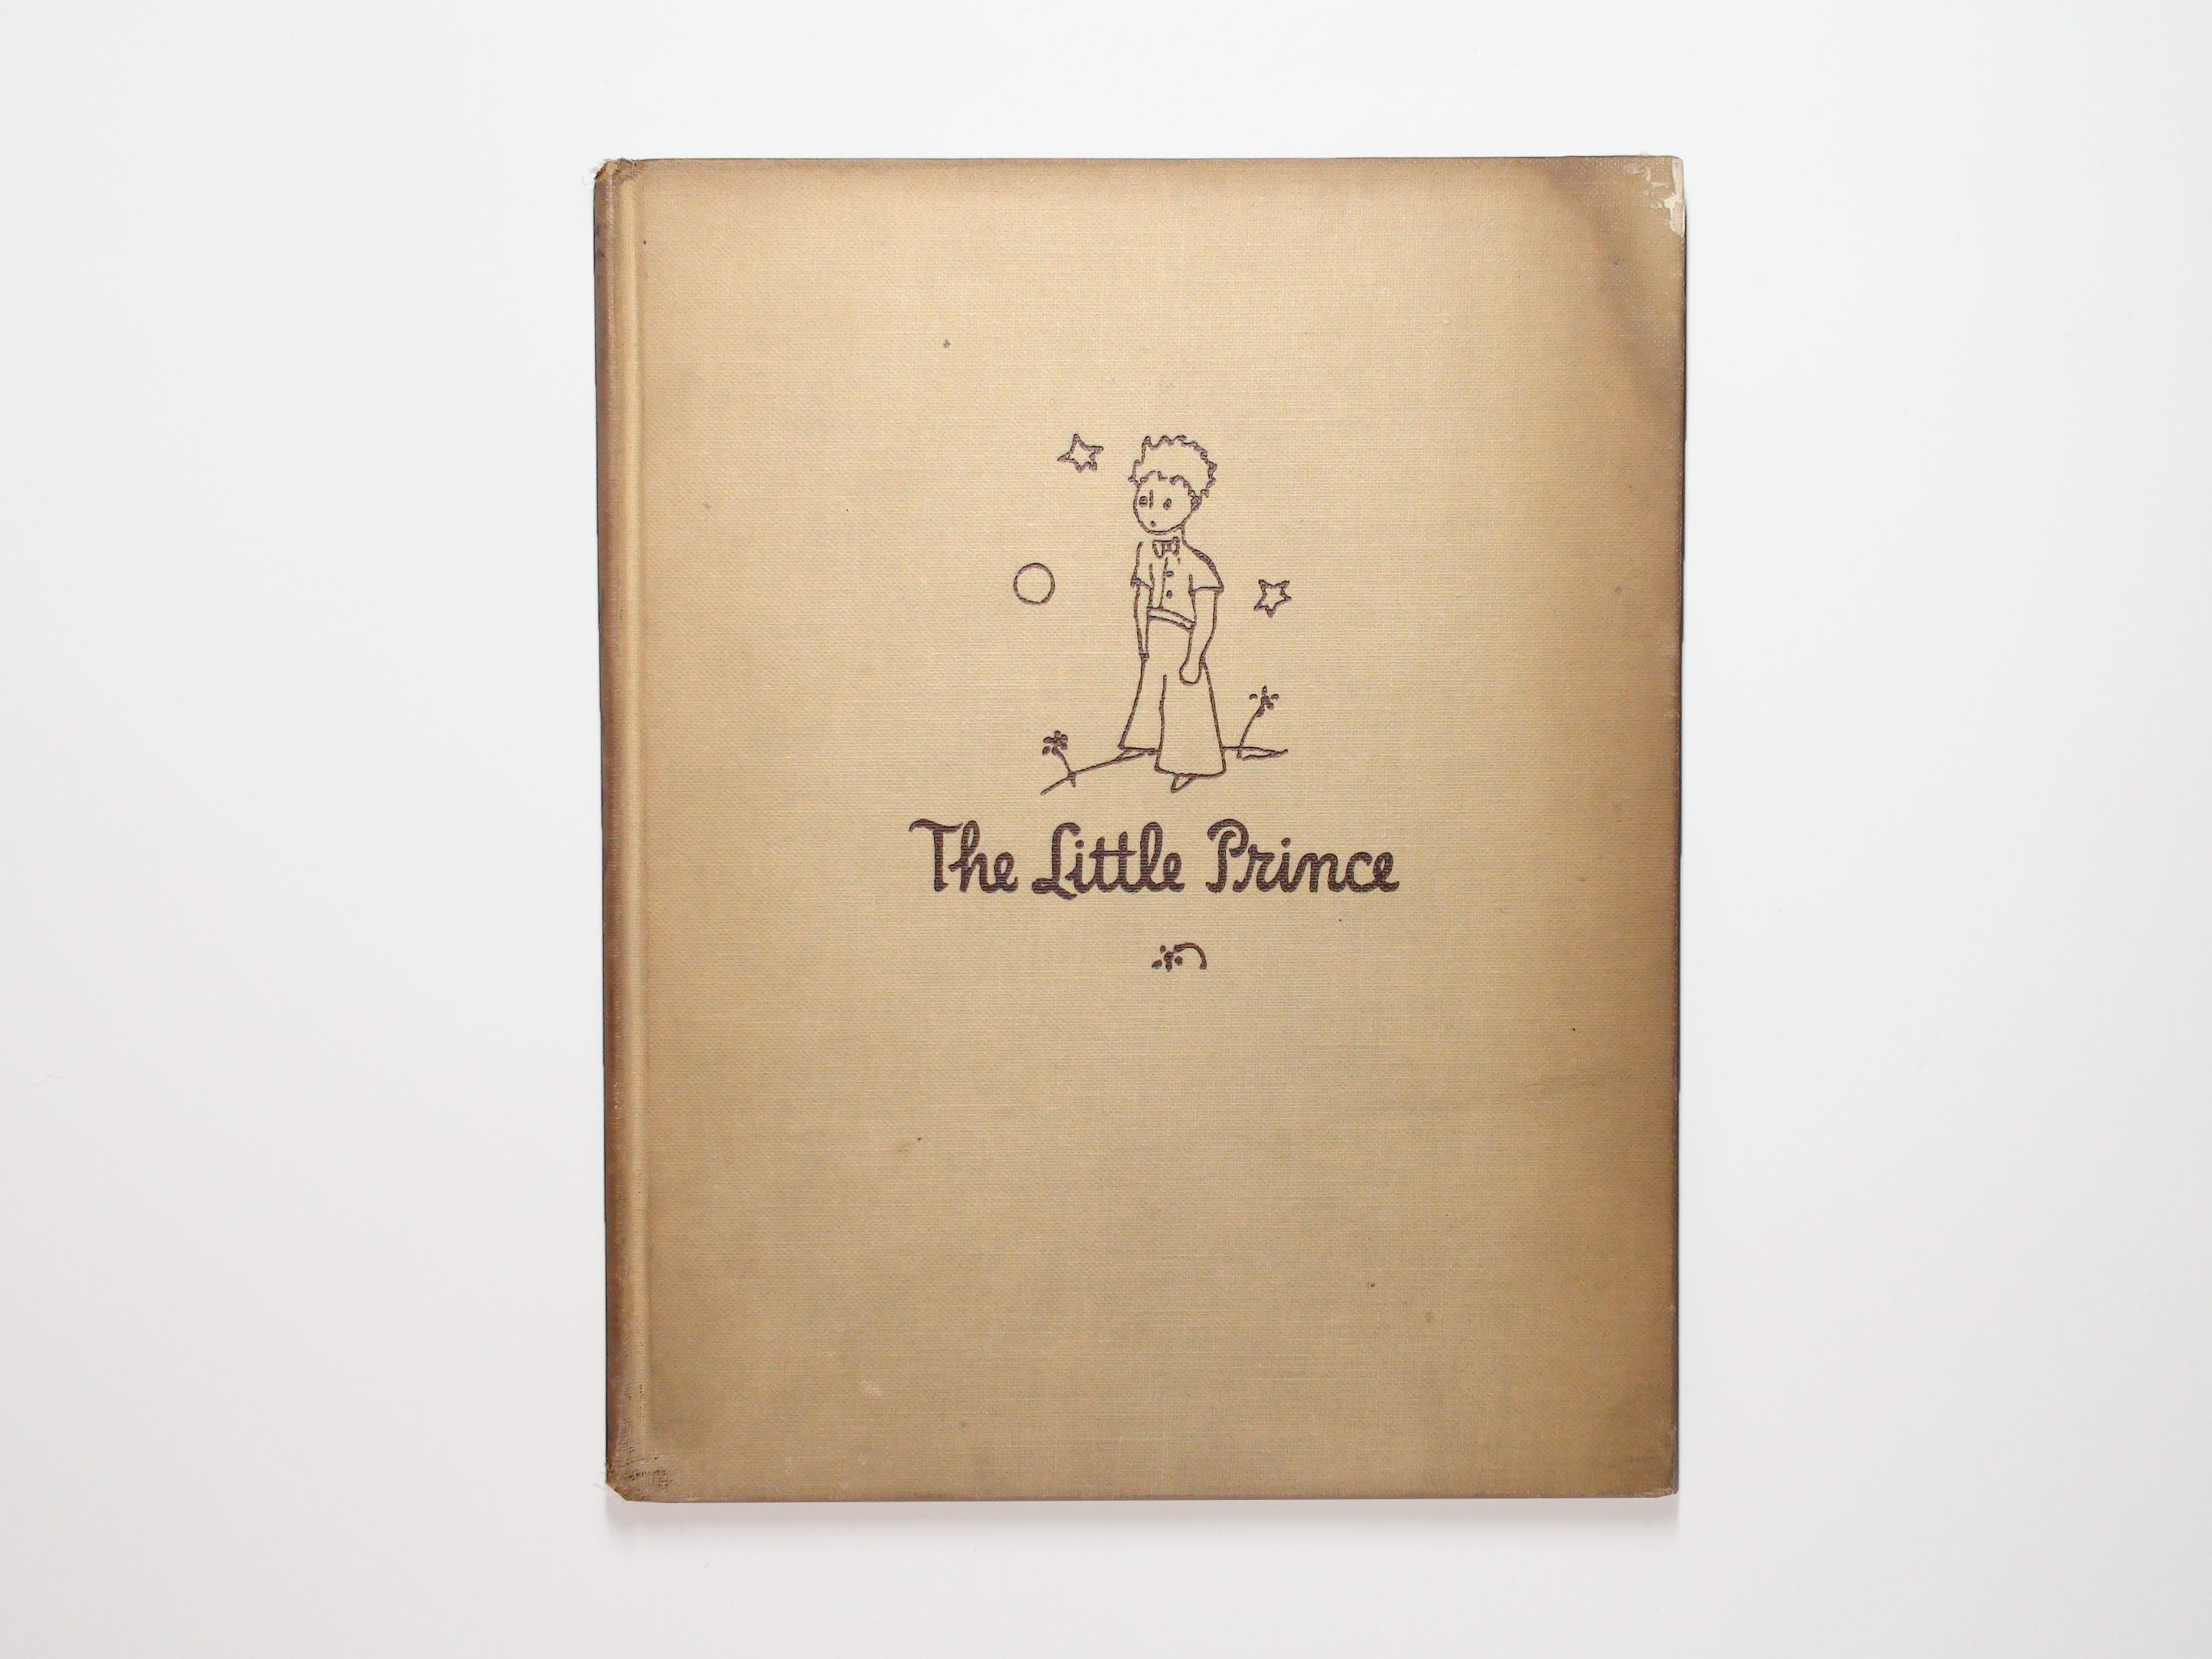 The Little Prince by Antoine De Saint-Exupery, Illustrated, with D/J, 1943/1960s